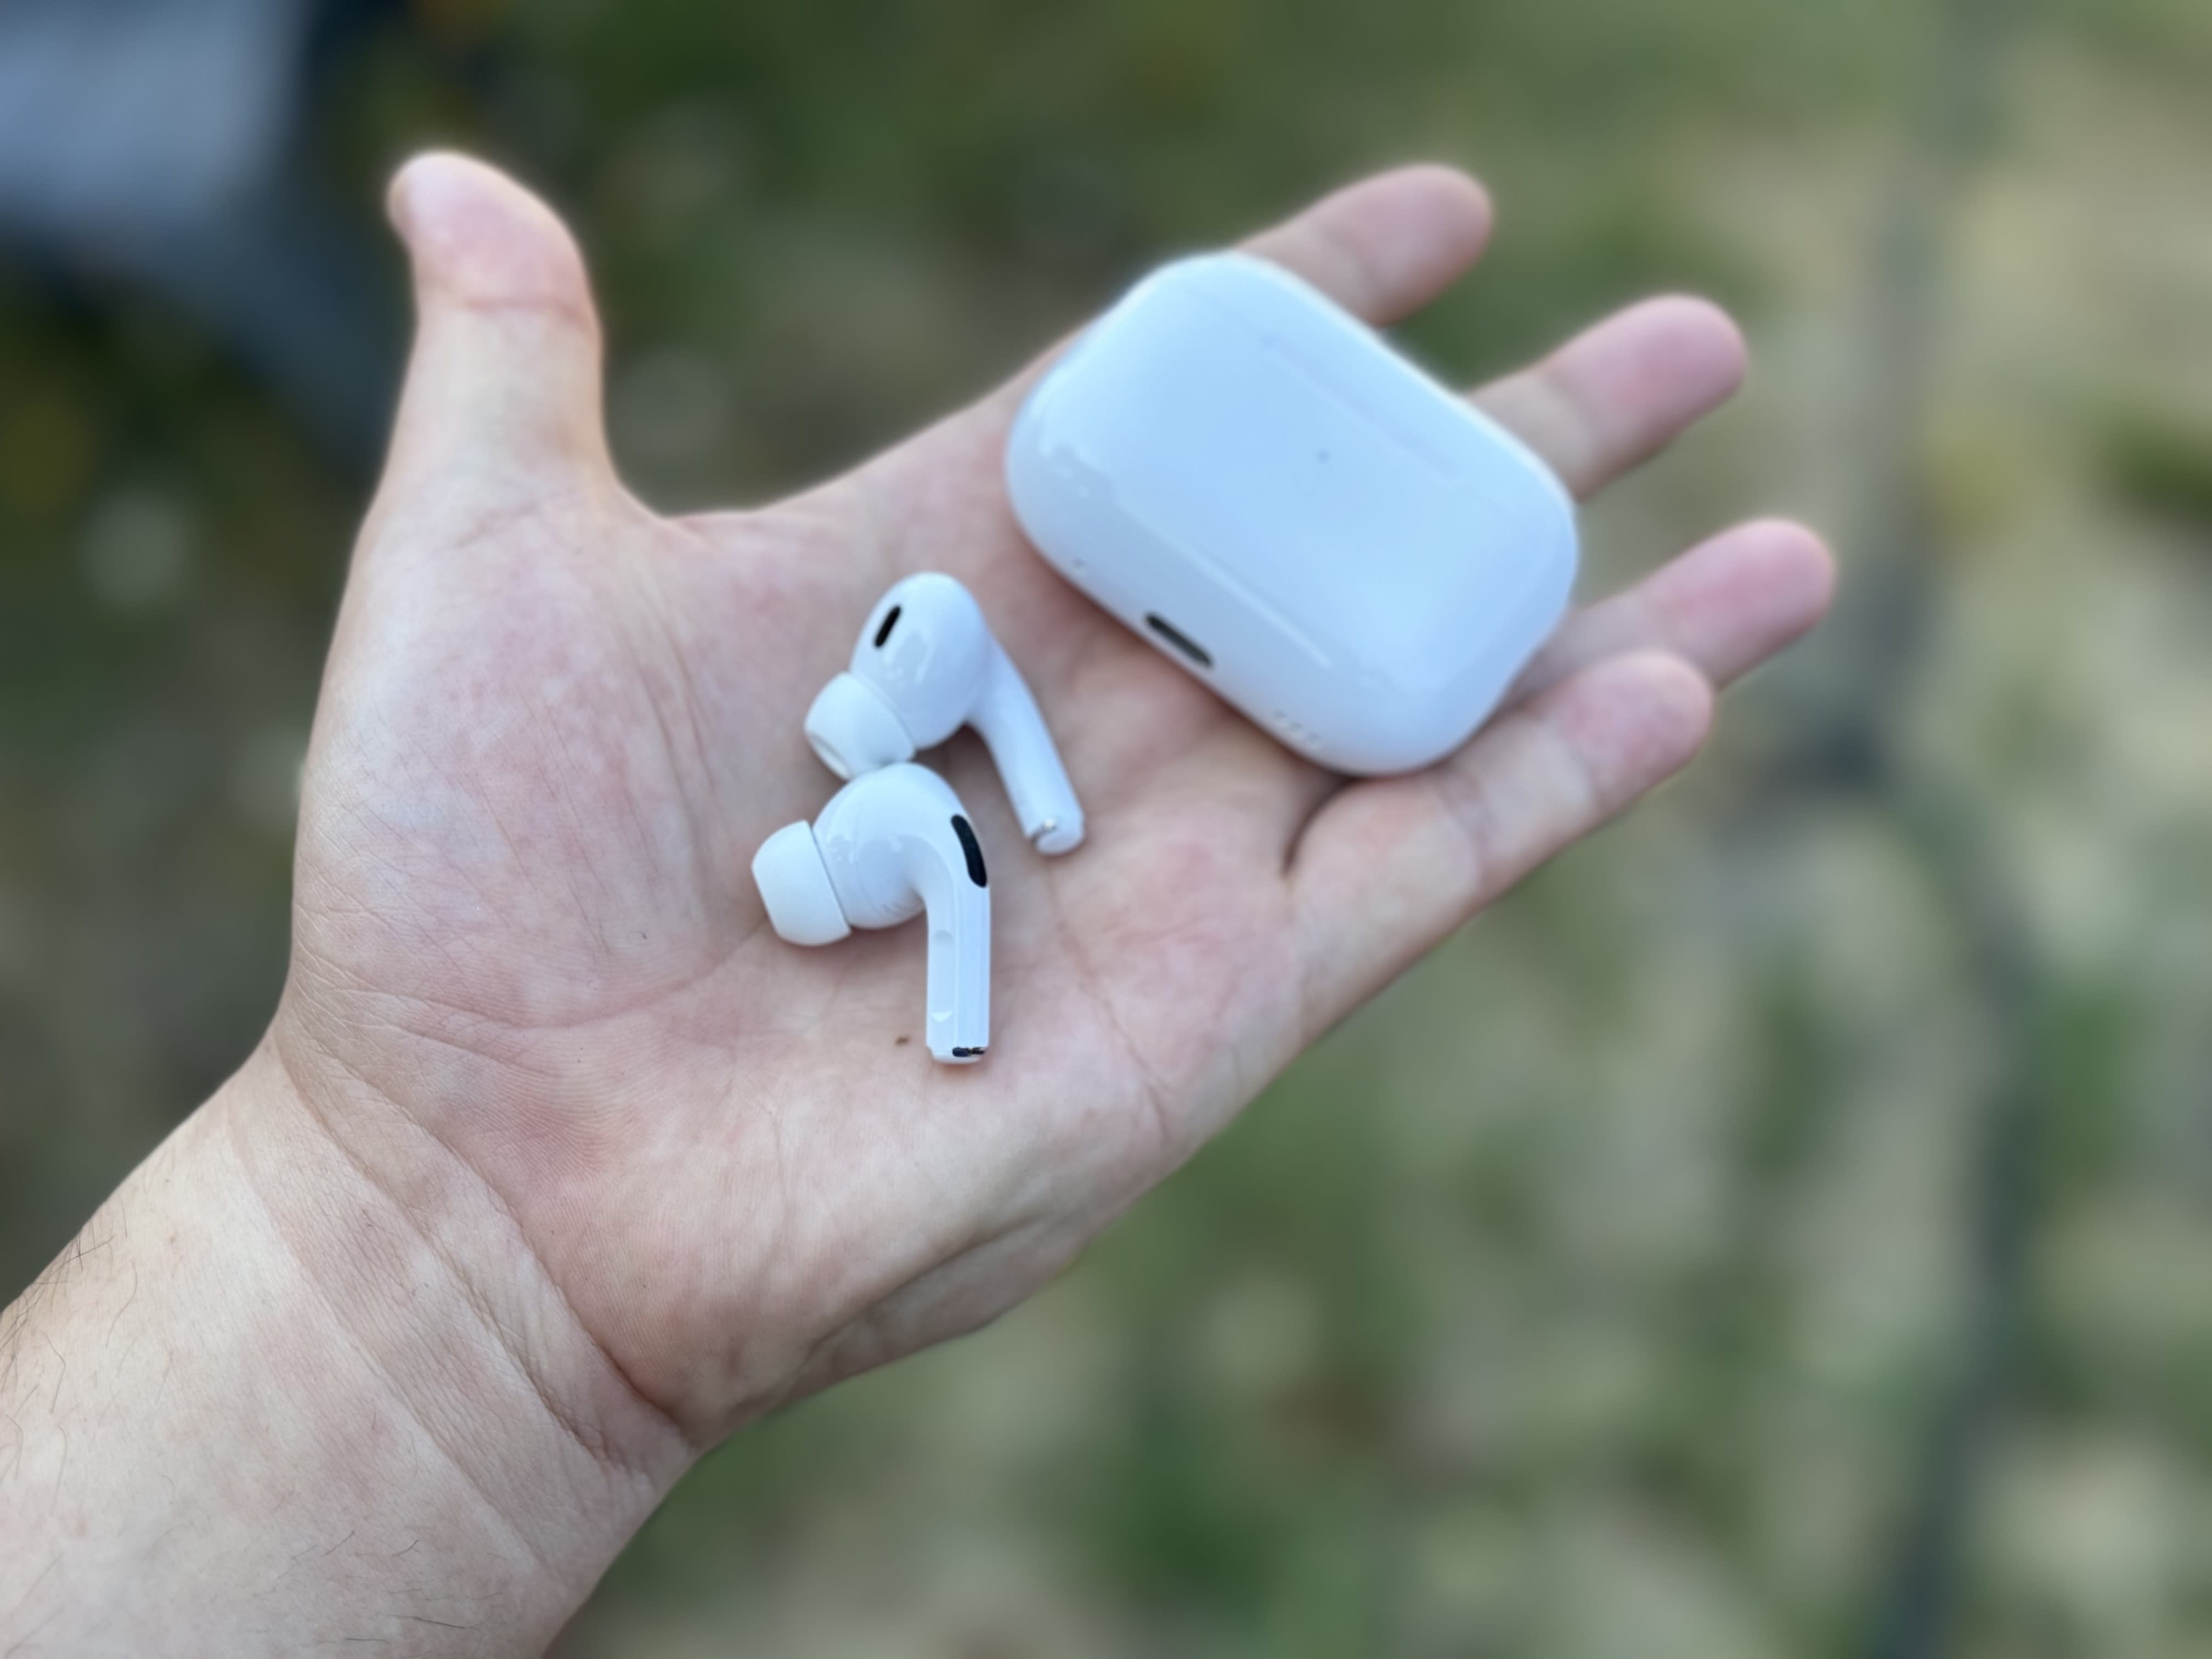 Apple's new AirPods won't have to be taken out of your ears as often,
thanks to sophisticated AI